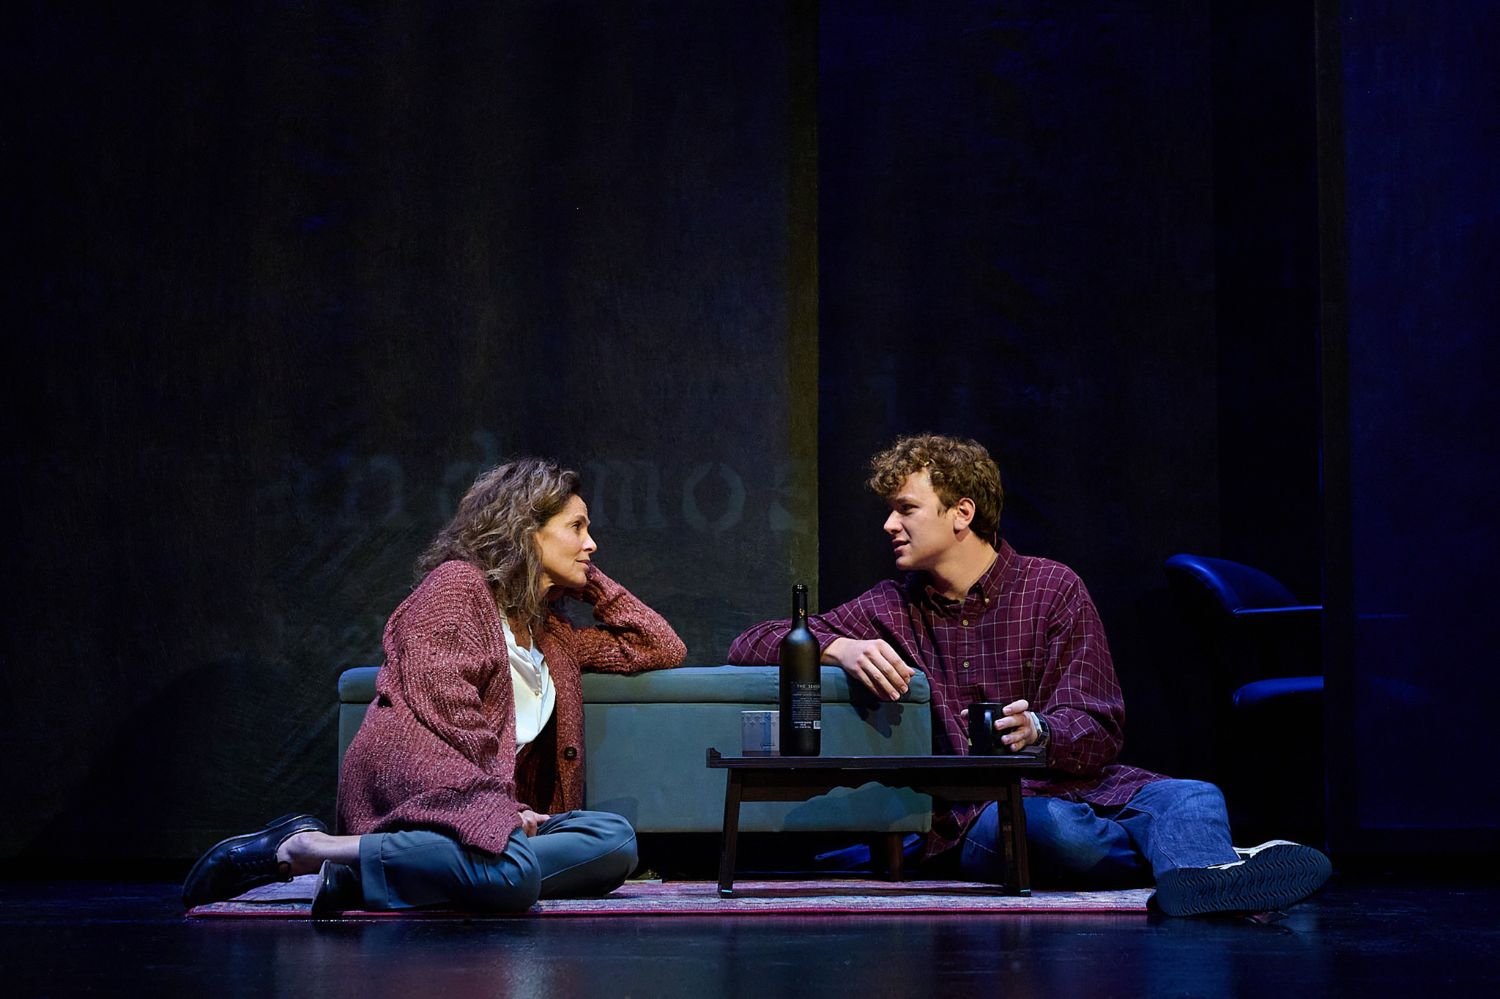 PHOTO: Mike Palma | The South Pasadenan | Amy Brenneman and Anders Keith in The Sound Inside on stage at Pasadena Playhouse.